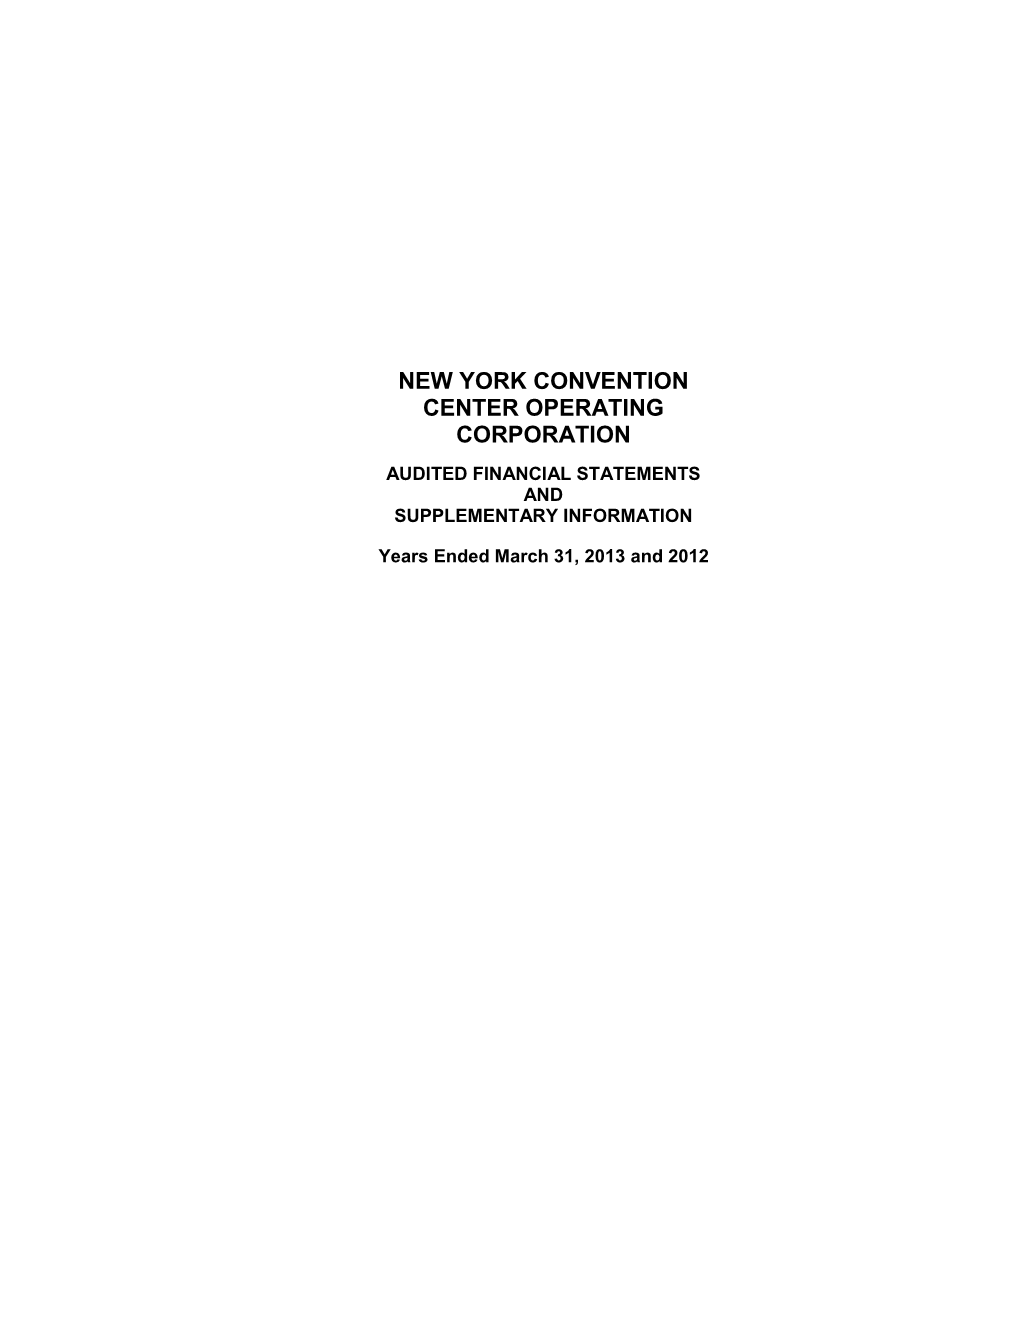 New York Convention Center Operating Corporation